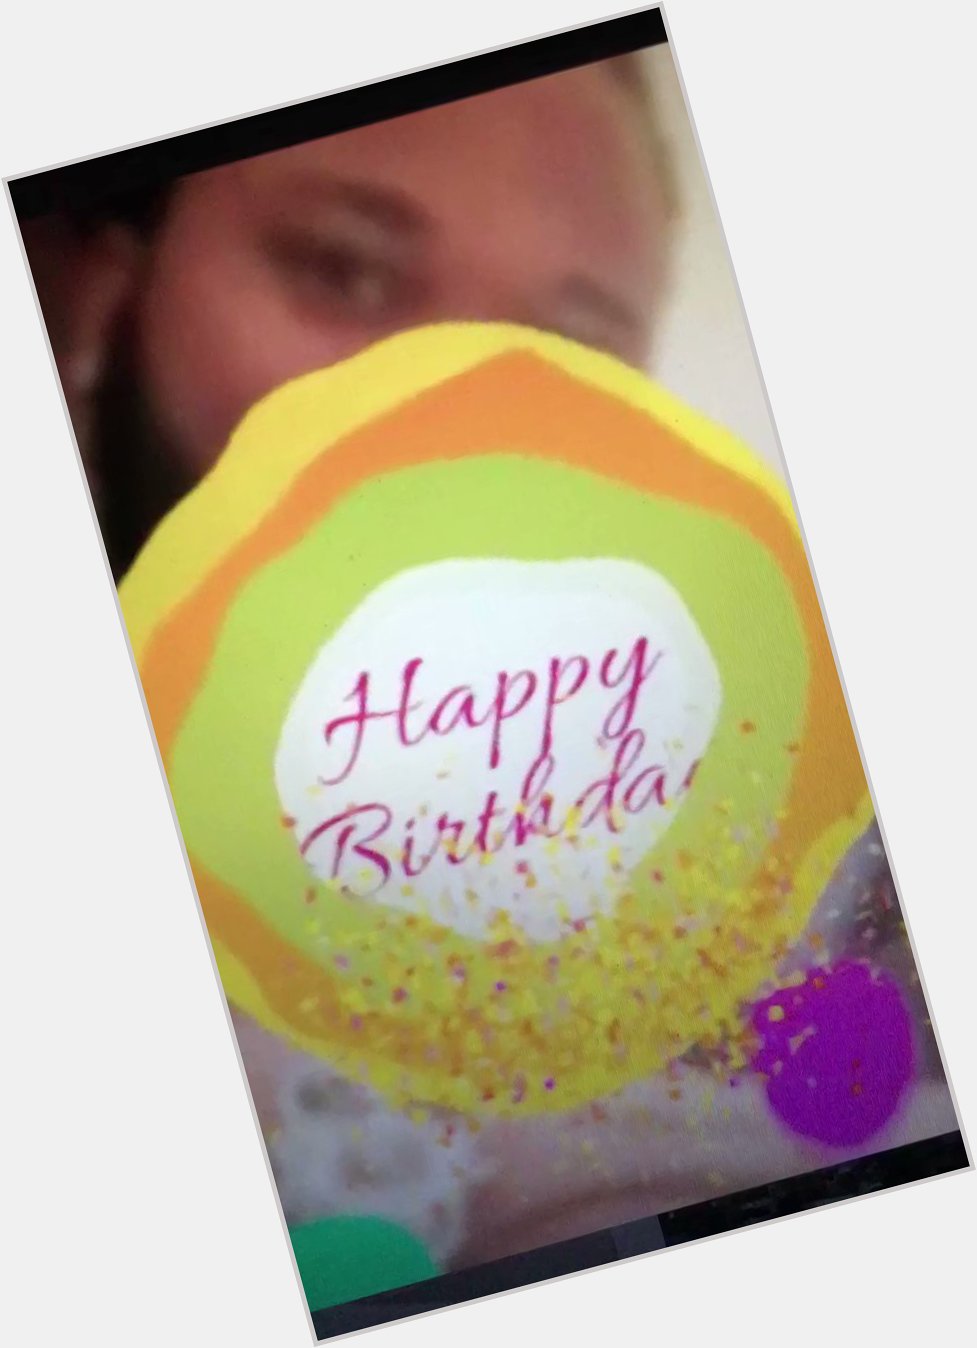 LOVE THIS 

Johnny Cueto making a Happy Birthday video for himself on his Instagram is so good 